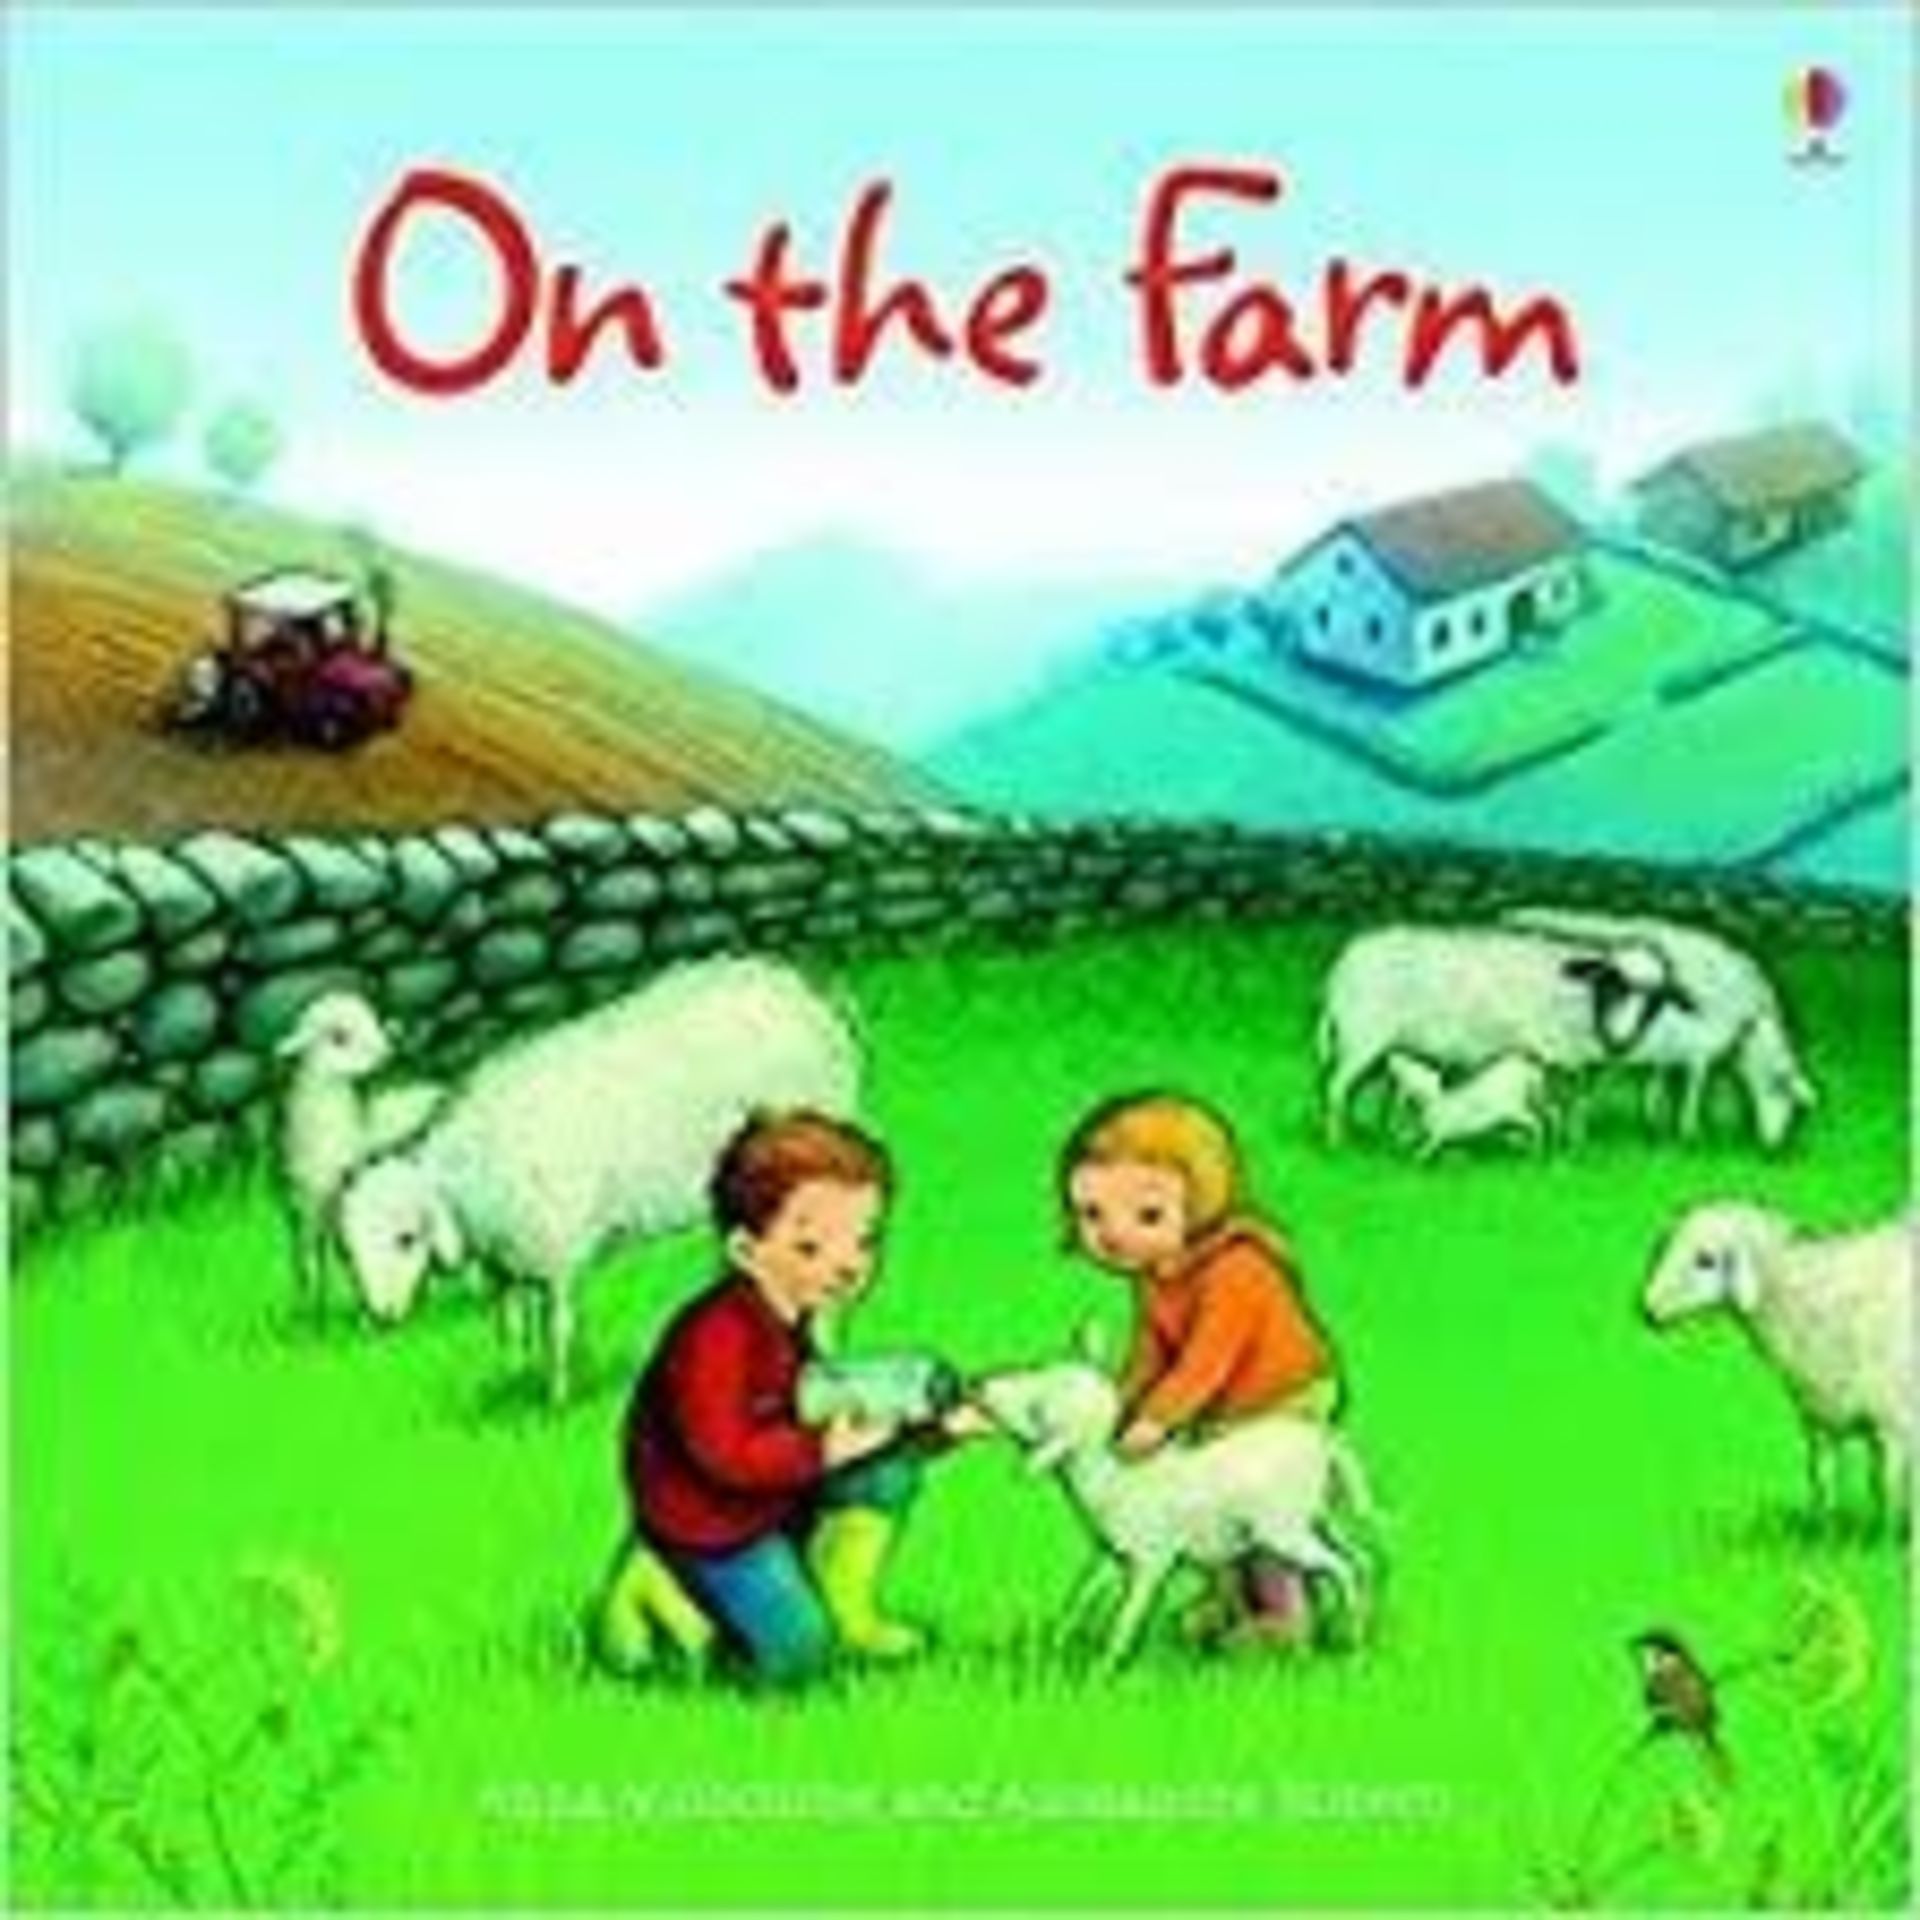 1 LOT TO CONTAIN 5 "ON THE FARM" CHILDRENS BOOKS BY ANNA MILBOURNE AND ALESSANDRA ROBERTI / RRP £